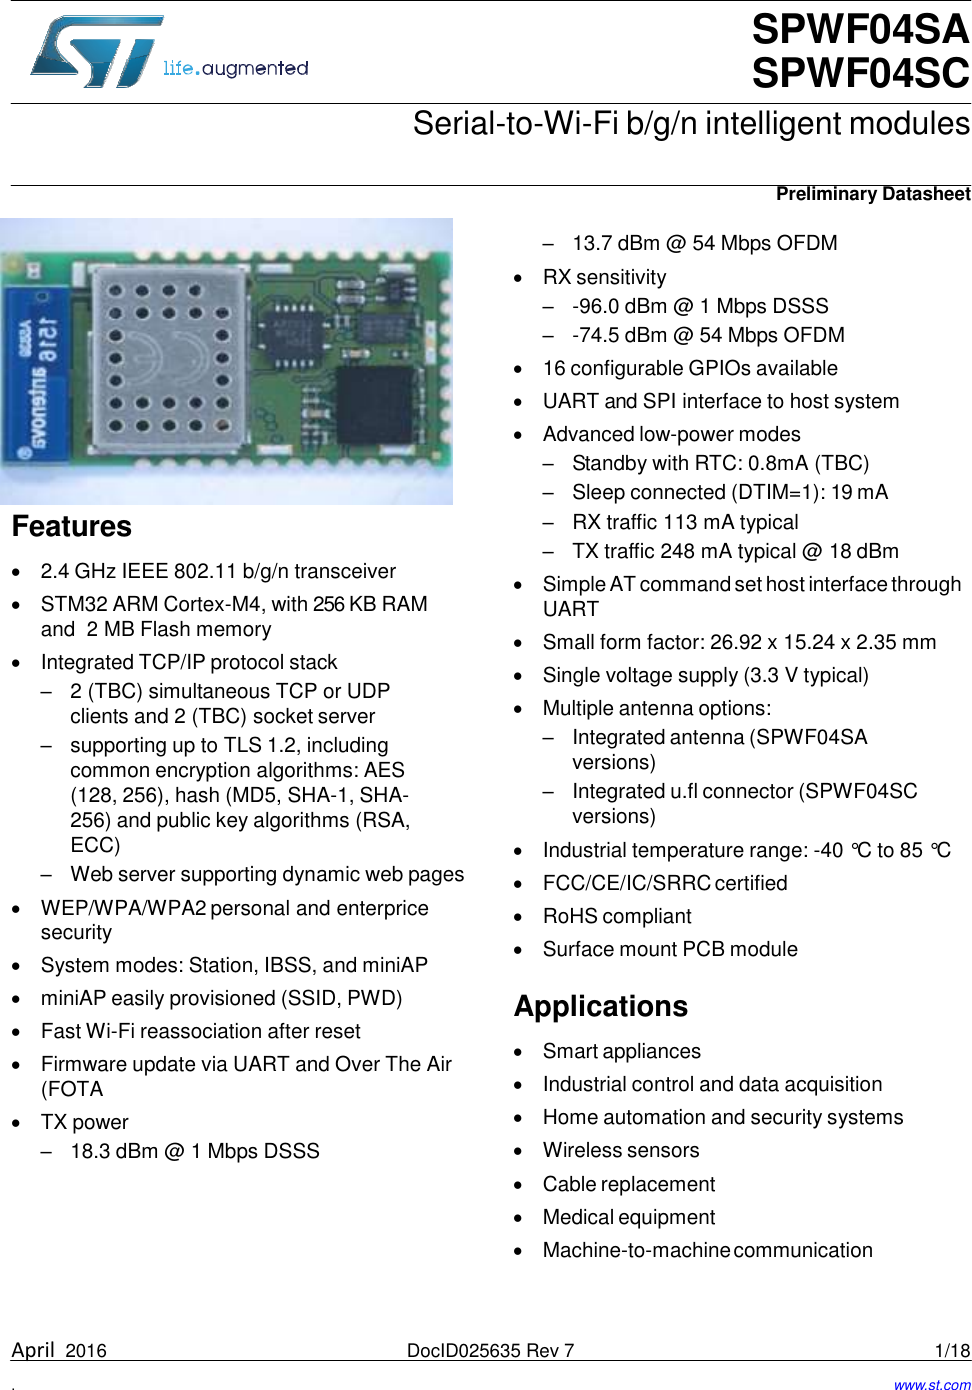 SPWF04SA SPWF04SC Serial-to-Wi-Fi b/g/n intelligent modules   Preliminary Datasheet                 Features   2.4 GHz IEEE 802.11 b/g/n transceiver  STM32 ARM Cortex-M4, with 256 KB RAM and  2 MB Flash memory  Integrated TCP/IP protocol stack – 2 (TBC) simultaneous TCP or UDP clients and 2 (TBC) socket server – supporting up to TLS 1.2, including common encryption algorithms: AES (128, 256), hash (MD5, SHA-1, SHA-256) and public key algorithms (RSA, ECC) – Web server supporting dynamic web pages  WEP/WPA/WPA2 personal and enterprice security  System modes: Station, IBSS, and miniAP  miniAP easily provisioned (SSID, PWD)  Fast Wi-Fi reassociation after reset  Firmware update via UART and Over The Air (FOTA  TX power – 18.3 dBm @ 1 Mbps DSSS – 13.7 dBm @ 54 Mbps OFDM  RX sensitivity – -96.0 dBm @ 1 Mbps DSSS – -74.5 dBm @ 54 Mbps OFDM  16 configurable GPIOs available  UART and SPI interface to host system  Advanced low-power modes – Standby with RTC: 0.8mA (TBC) – Sleep connected (DTIM=1): 19 mA – RX traffic 113 mA typical – TX traffic 248 mA typical @ 18 dBm  Simple AT command set host interface through UART  Small form factor: 26.92 x 15.24 x 2.35 mm  Single voltage supply (3.3 V typical)  Multiple antenna options: – Integrated antenna (SPWF04SA versions) – Integrated u.fl connector (SPWF04SC versions)  Industrial temperature range: -40 °C to 85 °C  FCC/CE/IC/SRRC certified  RoHS compliant  Surface mount PCB module  Applications   Smart appliances  Industrial control and data acquisition  Home automation and security systems  Wireless sensors  Cable replacement  Medical equipment  Machine-to-machine communication    April  2016  DocID025635 Rev 7  1/18  .  www.st.com 